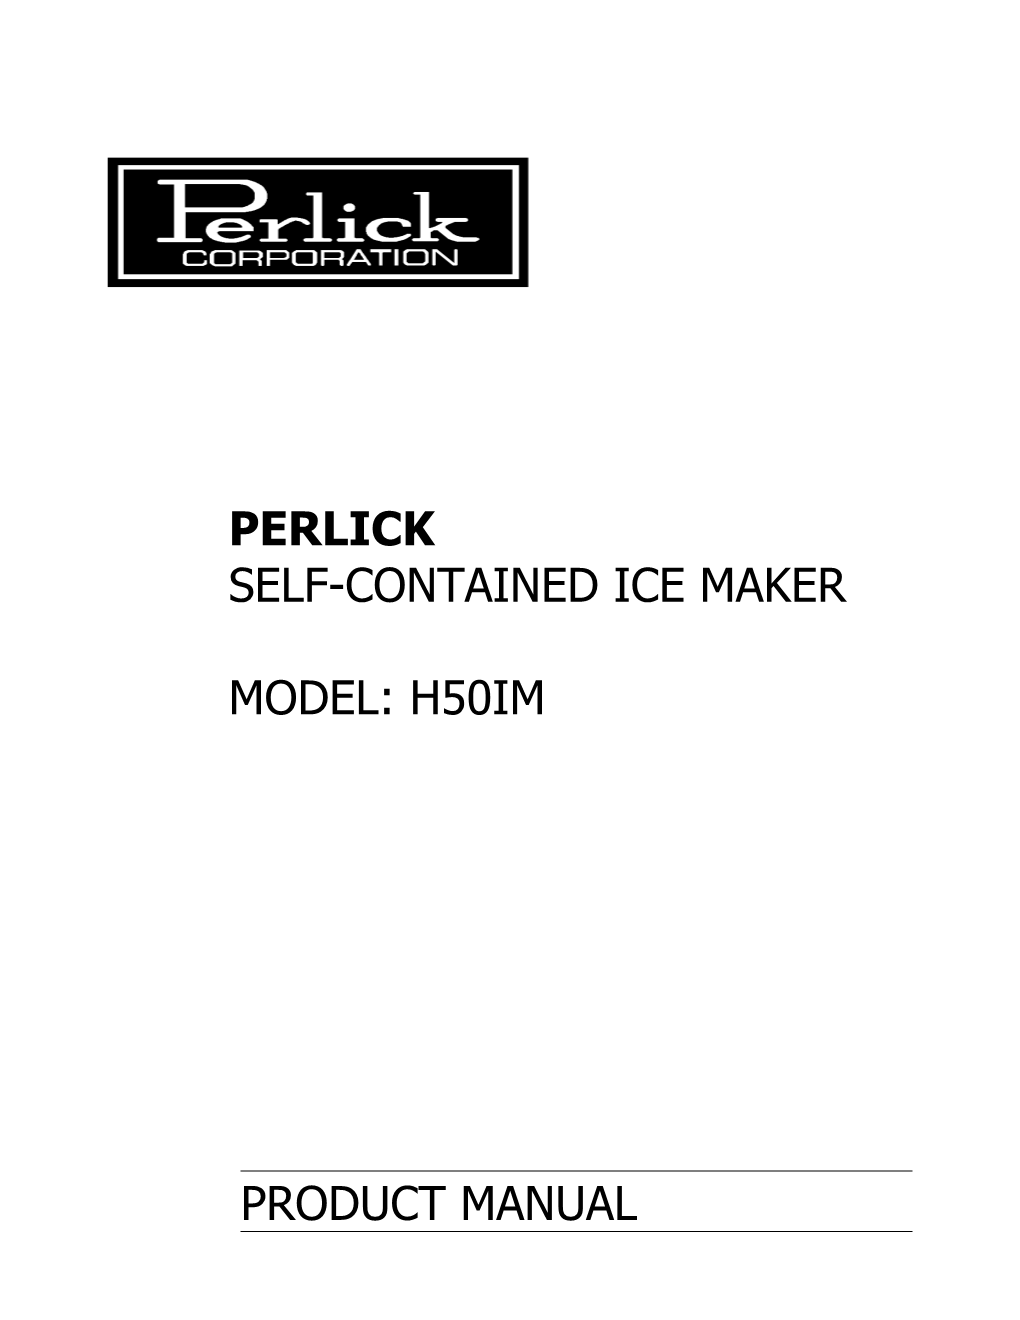 Perlick Self-Contained Ice Maker Model: H50im Product